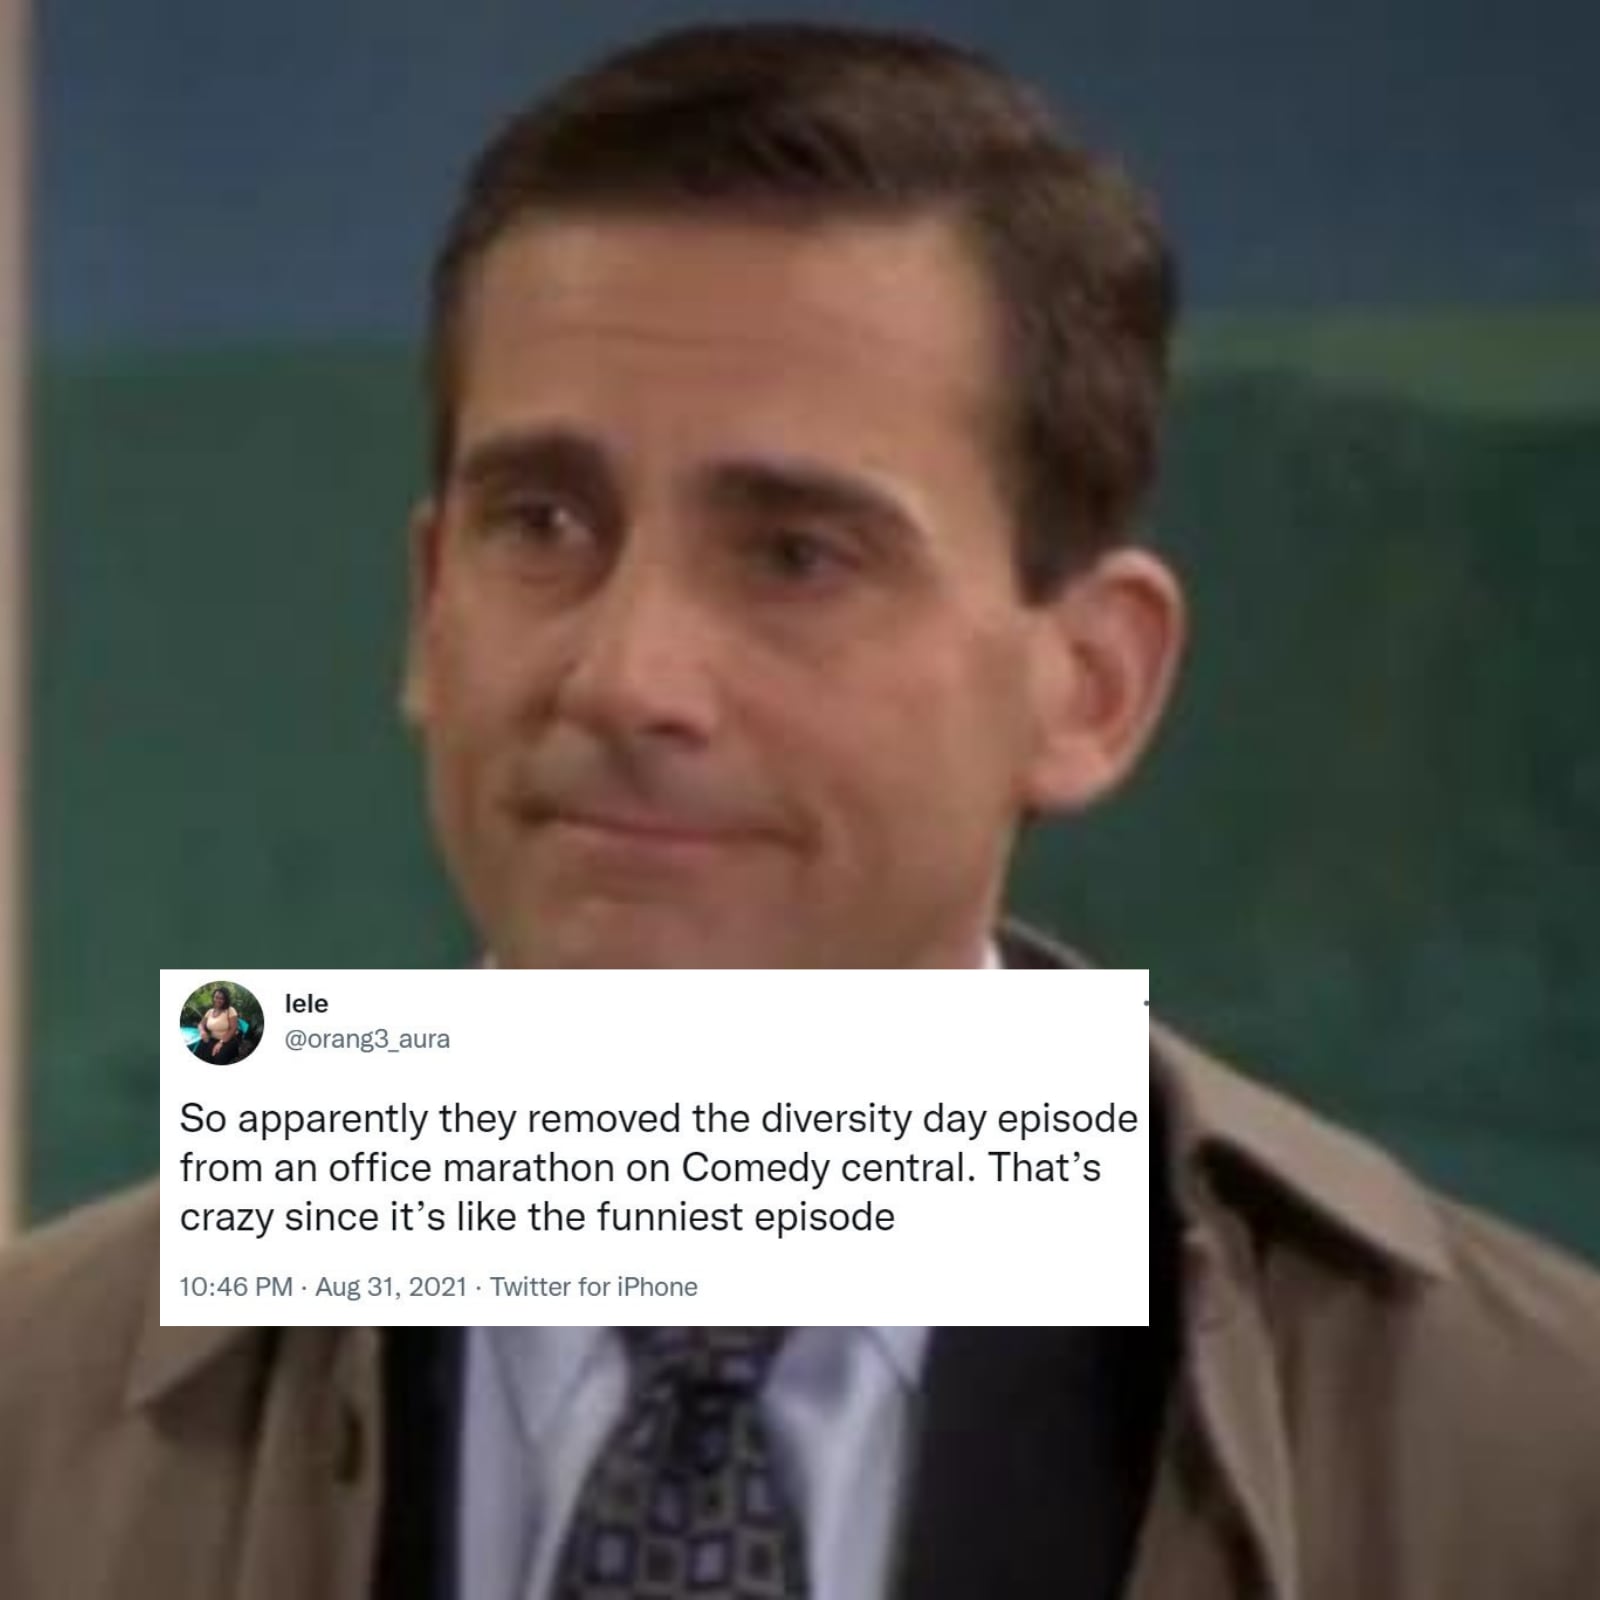 The Office' Diversity Day Episode was Removed by Comedy Central and Fans  are Upset